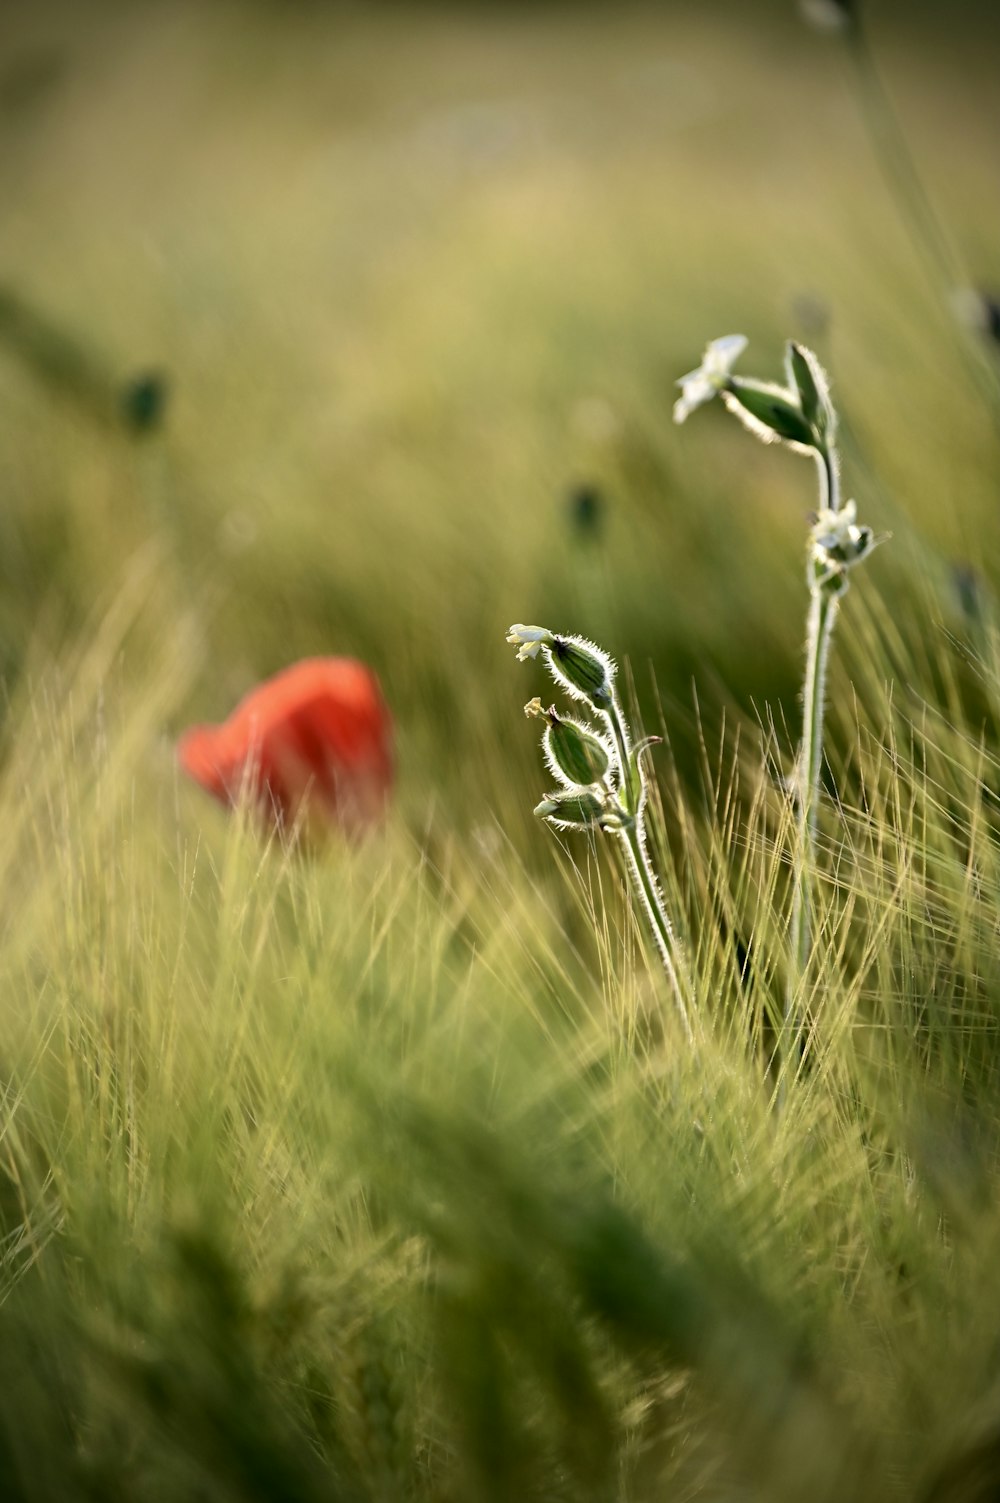 a red poppy in a field of tall grass